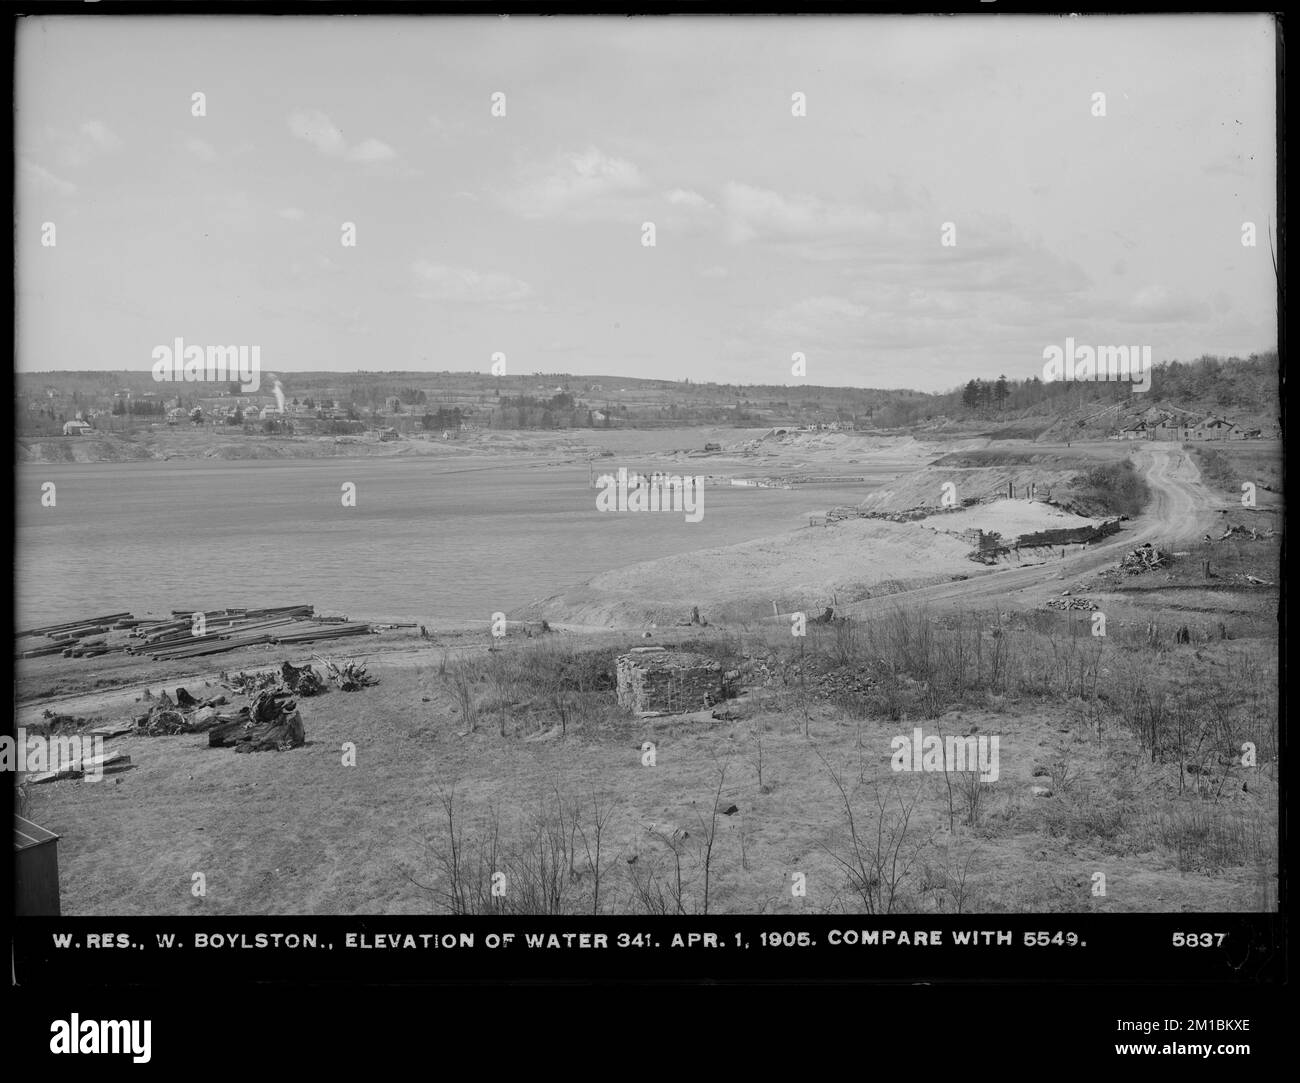 Wachusett Reservoir, reservoir at West Boylston, elevation of water 341 (compare with No. 5549), West Boylston, Mass., Apr. 1, 1905 , waterworks, reservoirs water distribution structures, construction sites, cemeteries Stock Photo